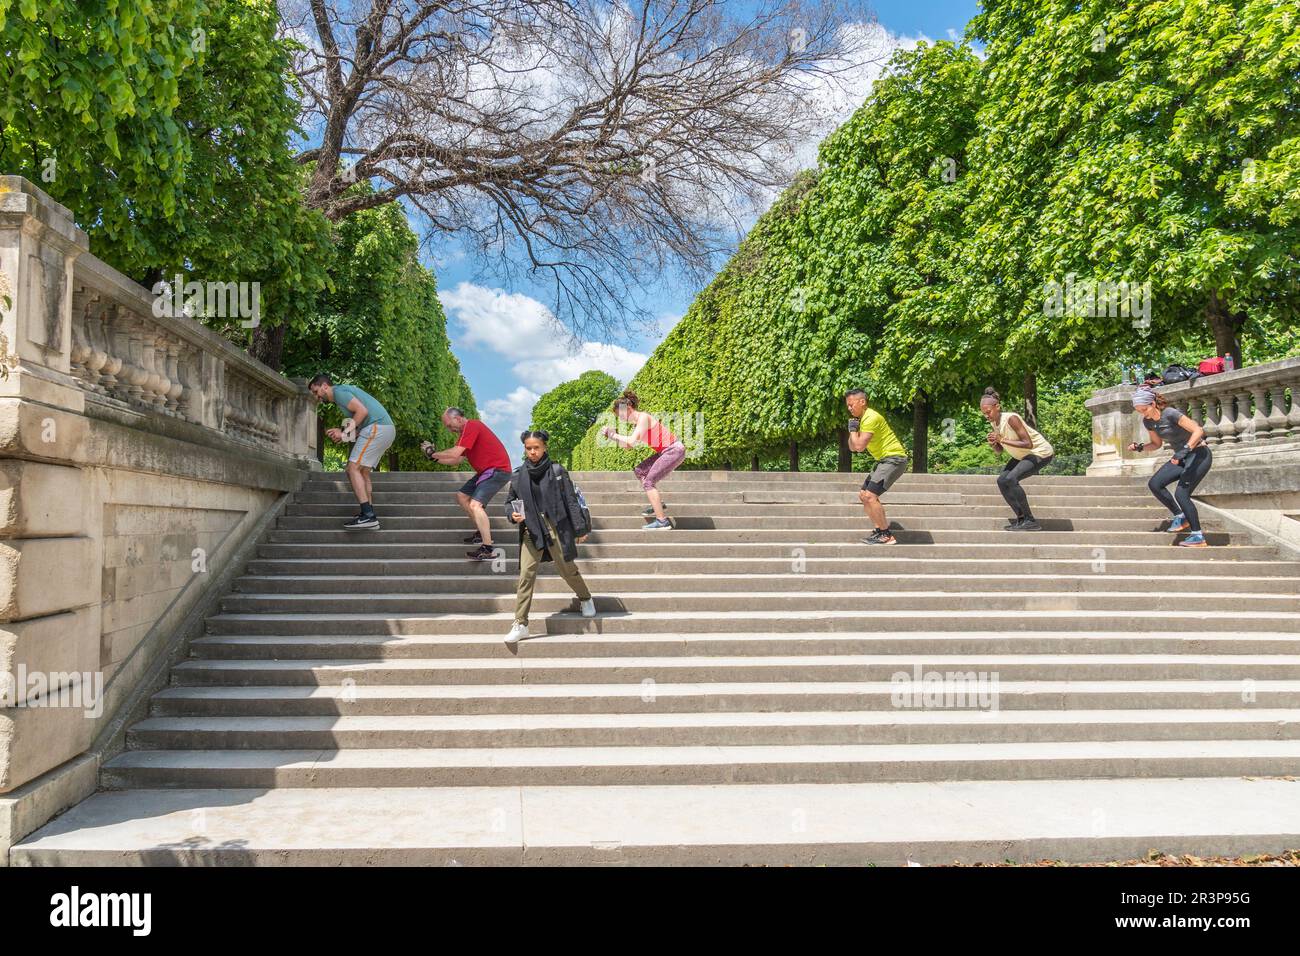 Tuileries Gardens, Paris, France. Sports class near the entrance to the gardens. Stock Photo